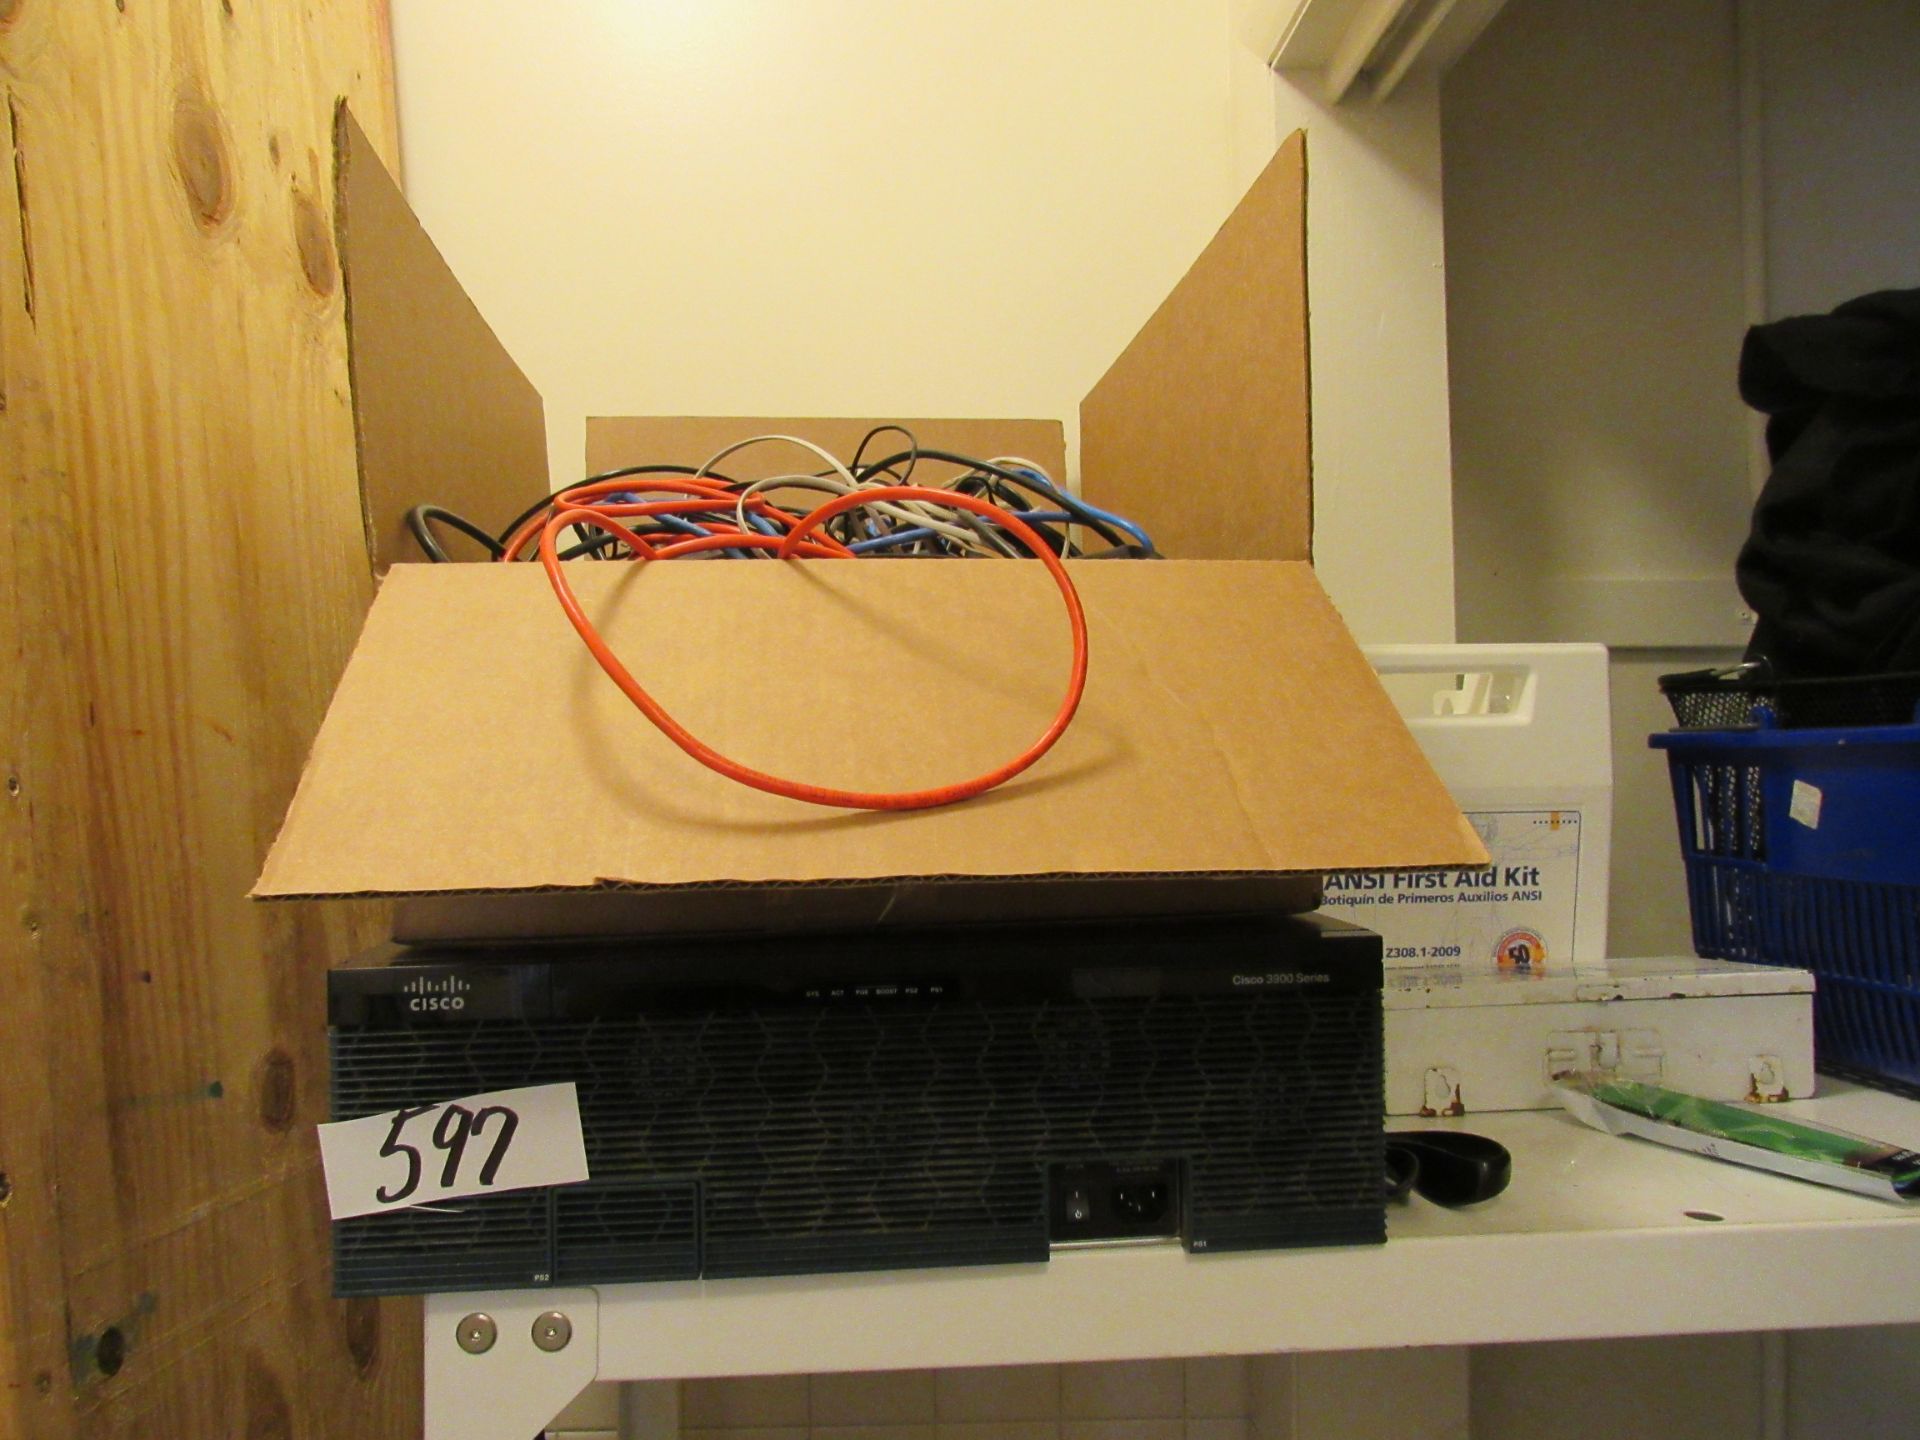 Cisco series 3300 and box of computer and electrical cords